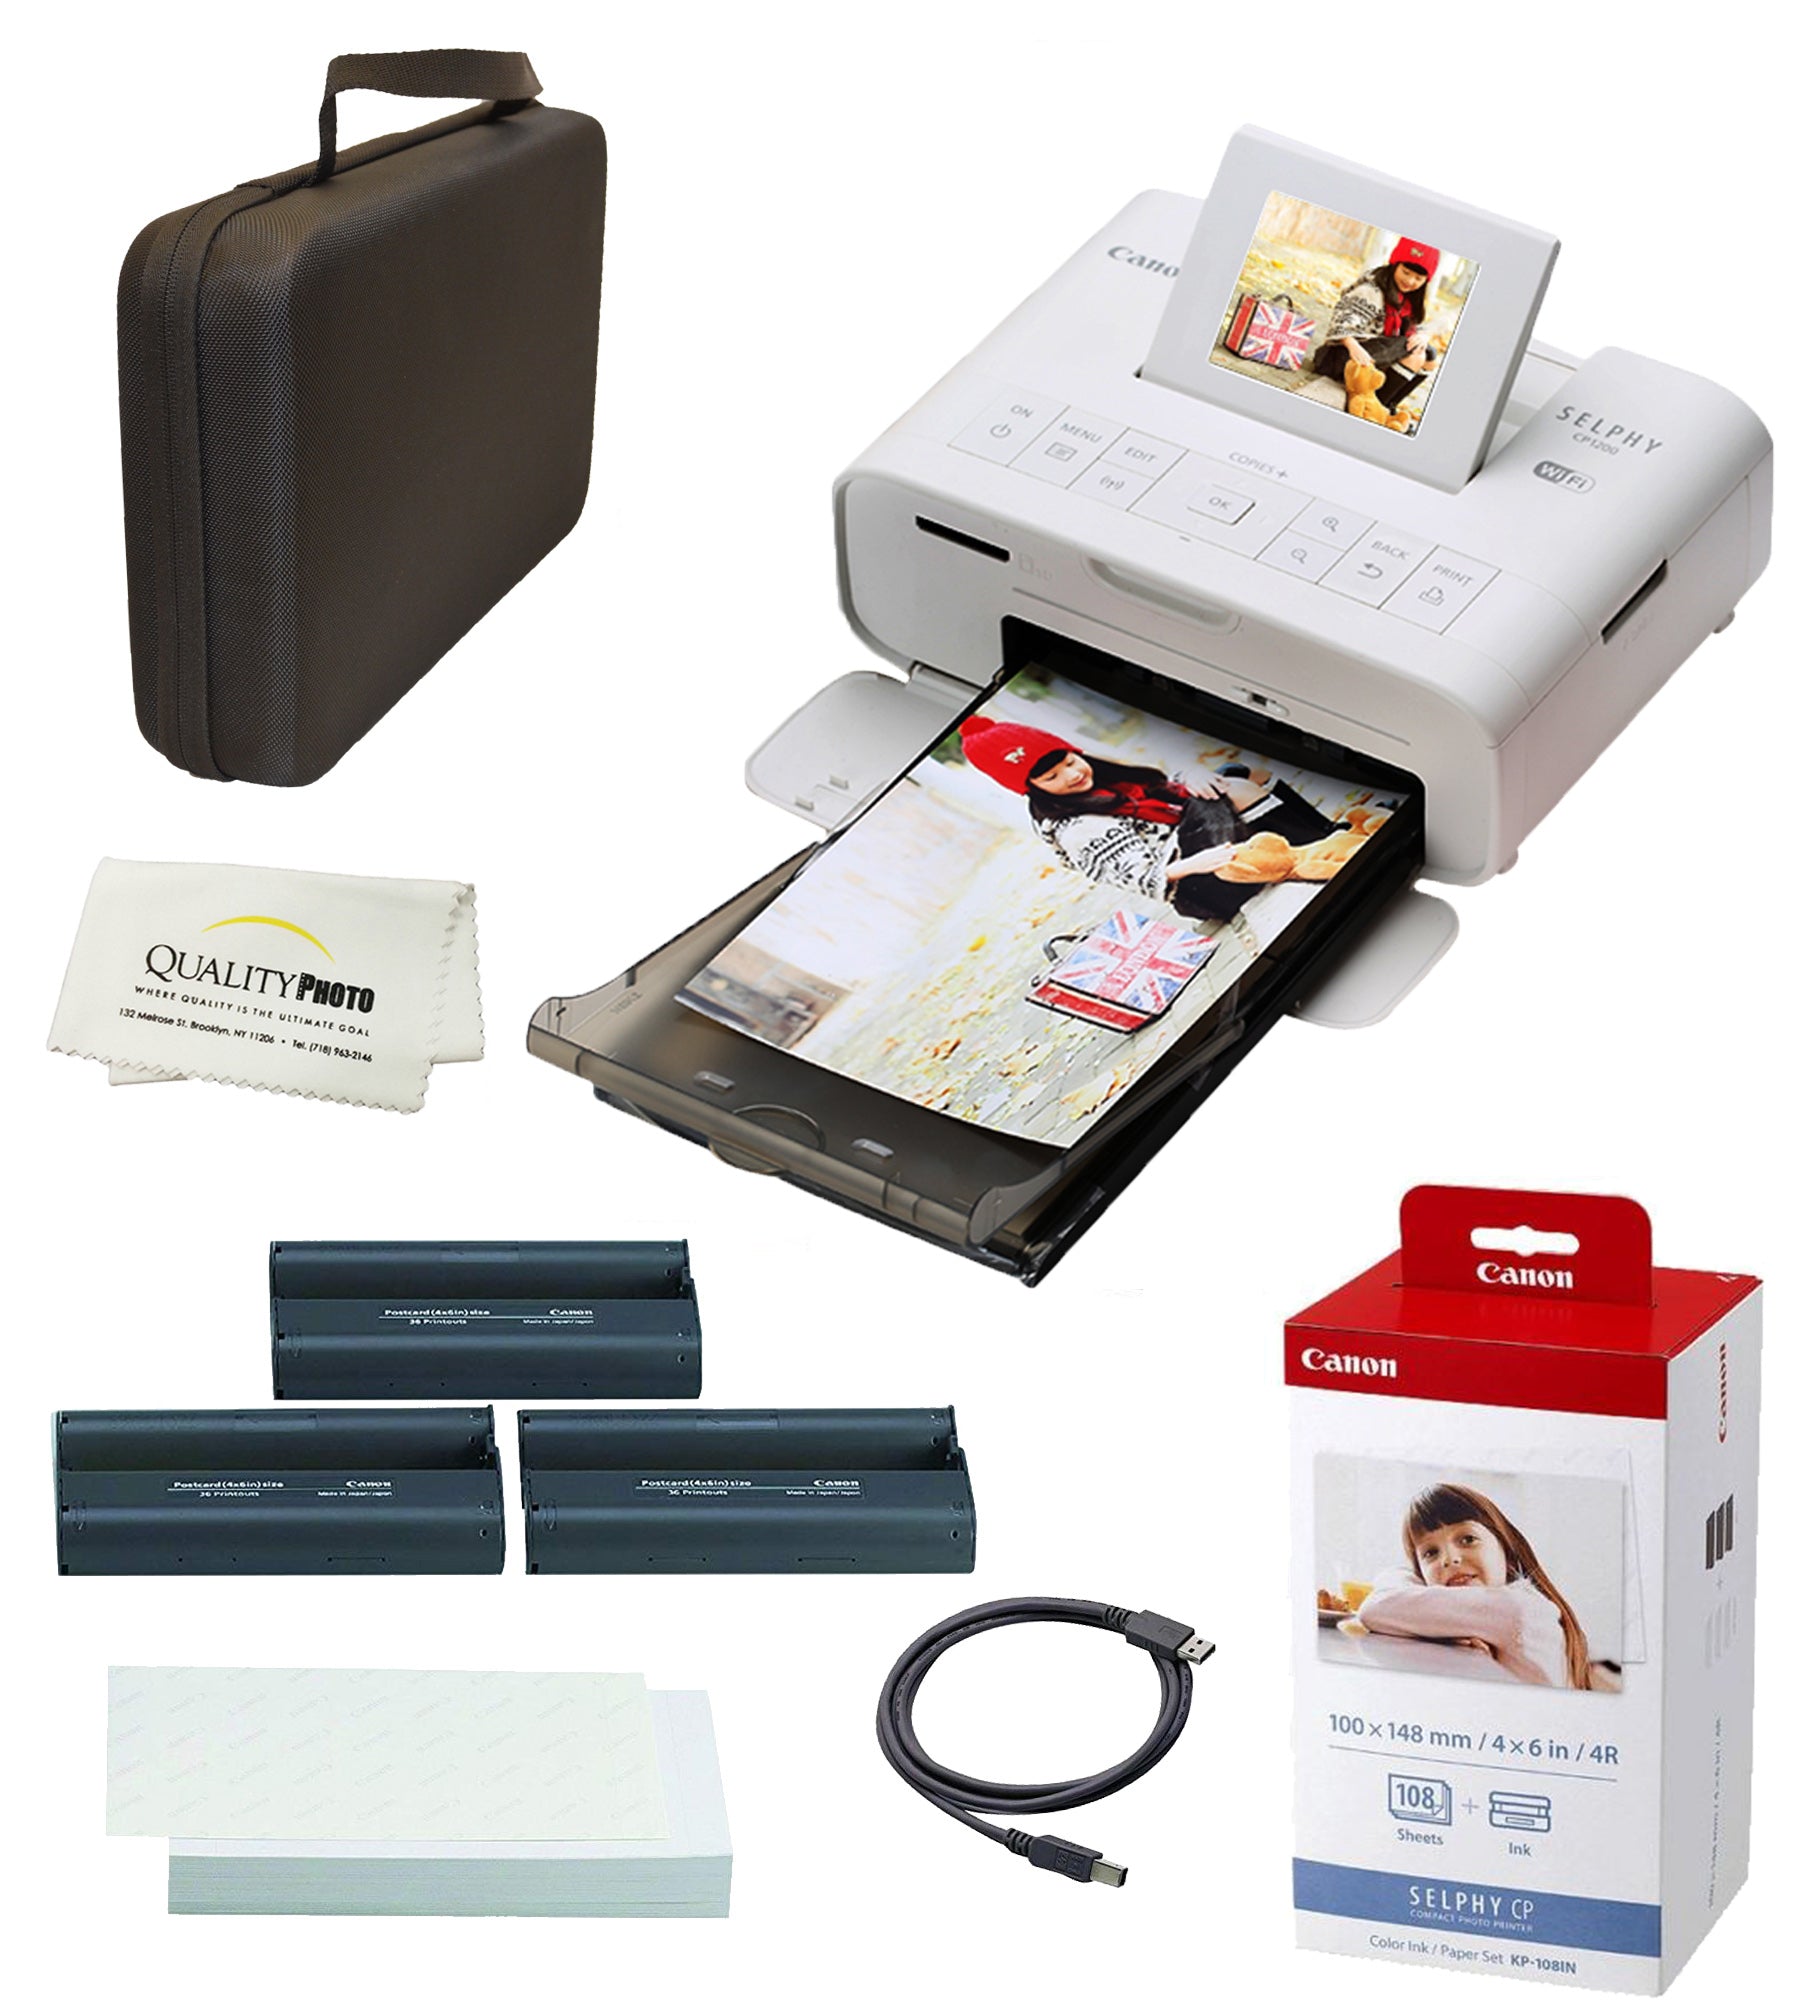 Canon SELPHY Wireless Compact Photo Printer with and M – QUALITY